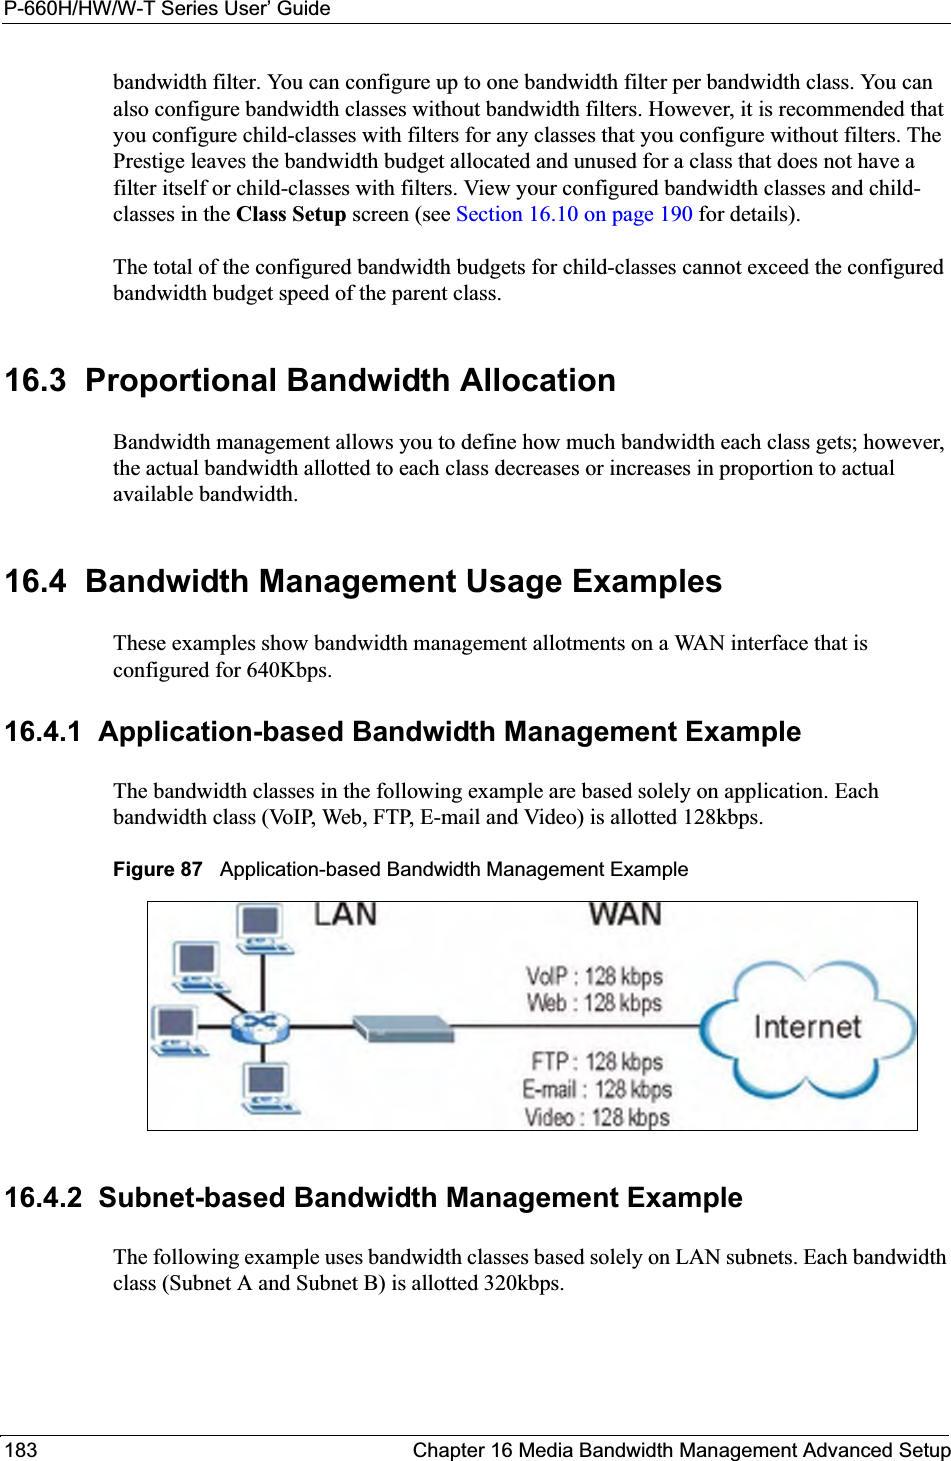 P-660H/HW/W-T Series User’ Guide183 Chapter 16 Media Bandwidth Management Advanced Setupbandwidth filter. You can configure up to one bandwidth filter per bandwidth class. You can also configure bandwidth classes without bandwidth filters. However, it is recommended that you configure child-classes with filters for any classes that you configure without filters. The Prestige leaves the bandwidth budget allocated and unused for a class that does not have a filter itself or child-classes with filters. View your configured bandwidth classes and child-classes in the Class Setup screen (see Section 16.10 on page 190 for details).The total of the configured bandwidth budgets for child-classes cannot exceed the configured bandwidth budget speed of the parent class. 16.3  Proportional Bandwidth AllocationBandwidth management allows you to define how much bandwidth each class gets; however, the actual bandwidth allotted to each class decreases or increases in proportion to actual available bandwidth. 16.4  Bandwidth Management Usage ExamplesThese examples show bandwidth management allotments on a WAN interface that is configured for 640Kbps.16.4.1  Application-based Bandwidth Management ExampleThe bandwidth classes in the following example are based solely on application. Each bandwidth class (VoIP, Web, FTP, E-mail and Video) is allotted 128kbps.Figure 87   Application-based Bandwidth Management Example16.4.2  Subnet-based Bandwidth Management ExampleThe following example uses bandwidth classes based solely on LAN subnets. Each bandwidth class (Subnet A and Subnet B) is allotted 320kbps.